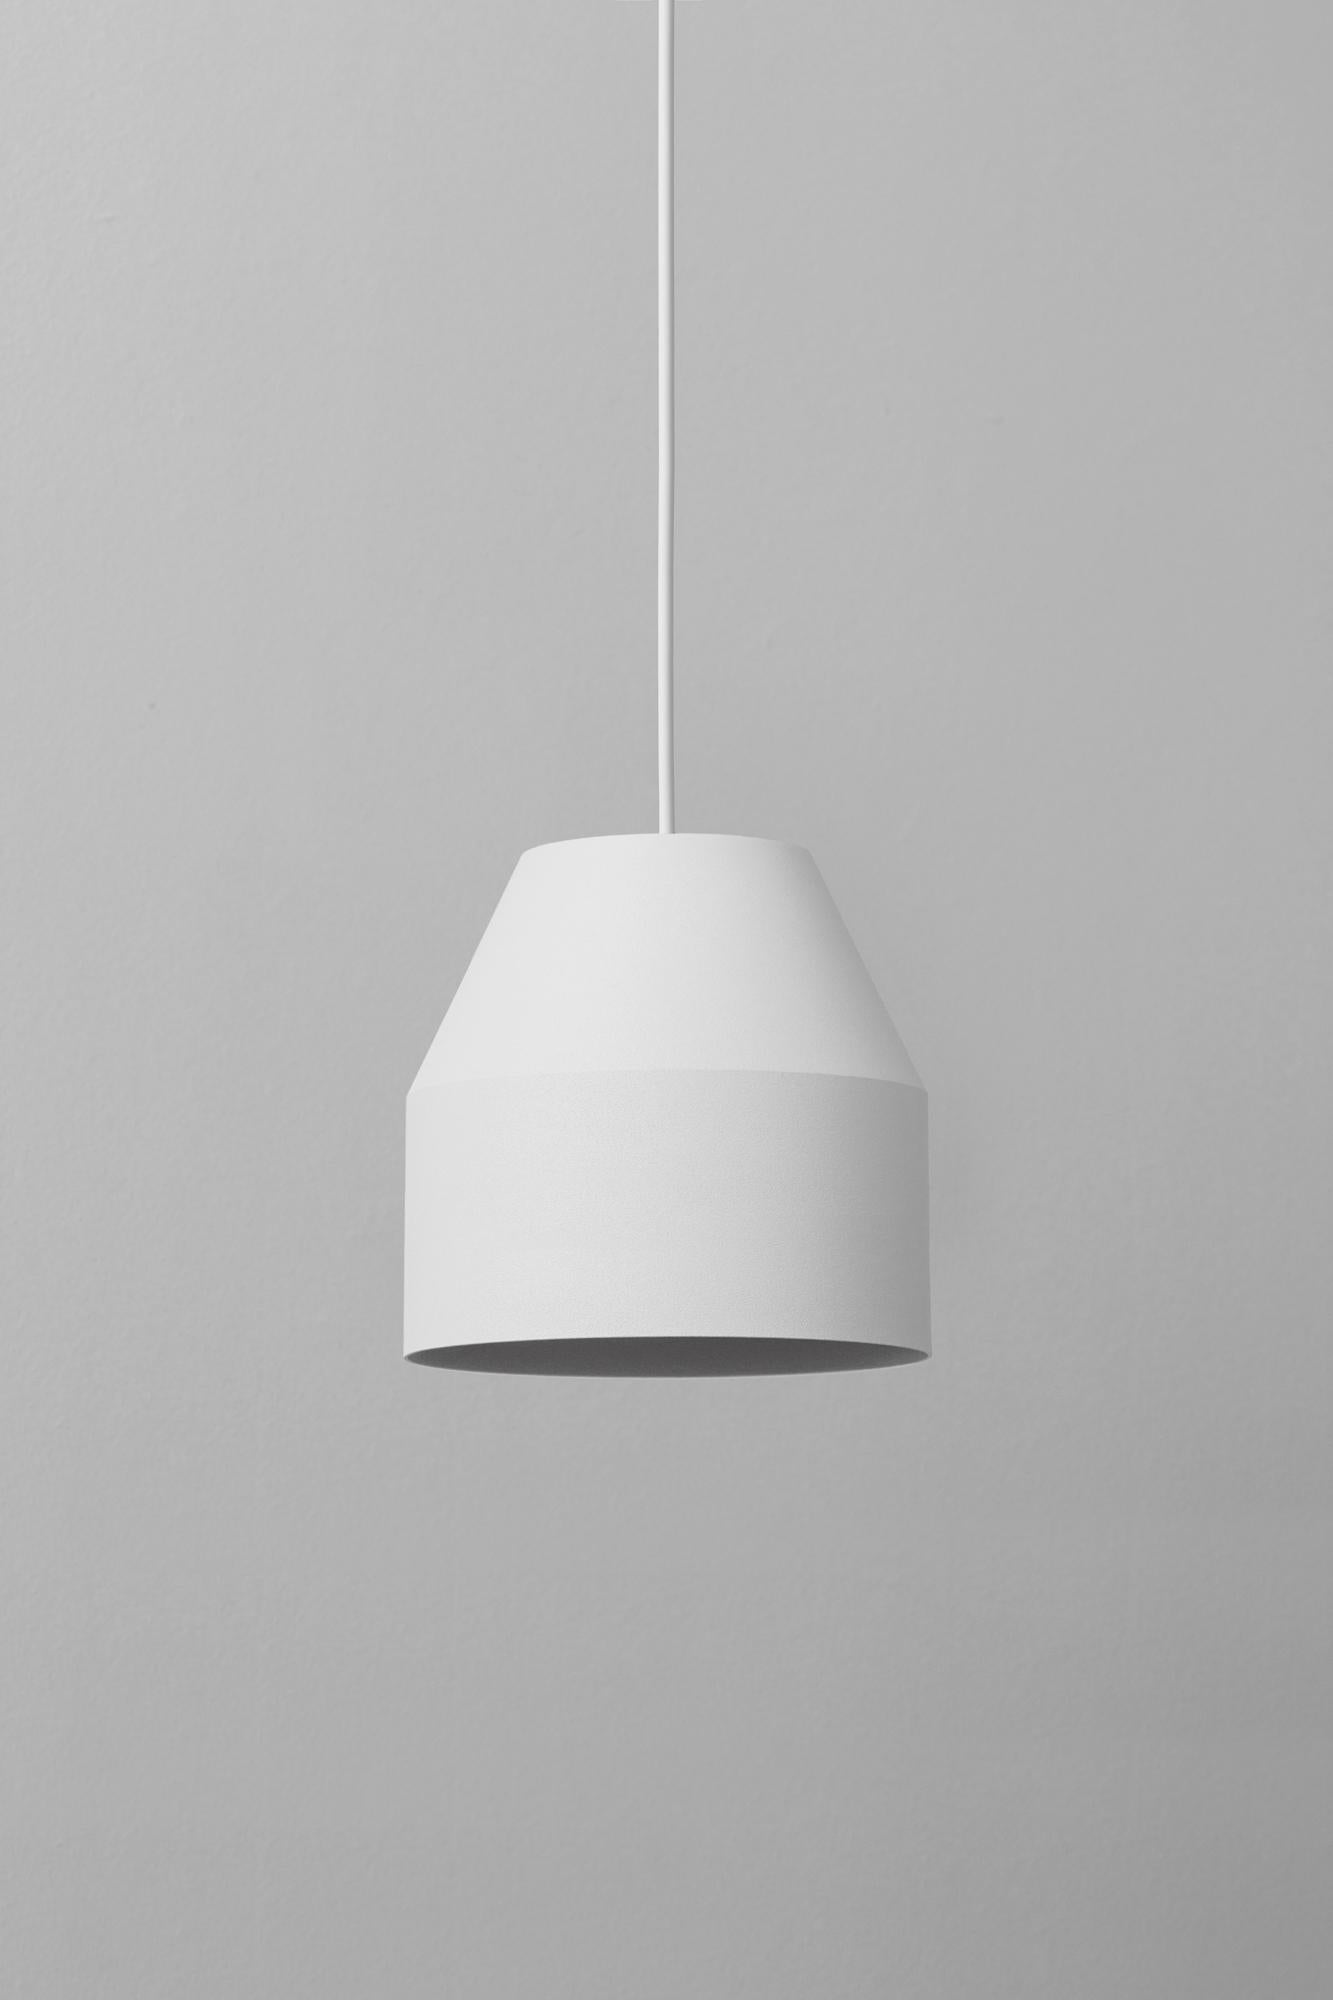 Big White Cap Pendant Lamp by +kouple
Dimensions: Ø 16 x H 16,5 cm. 
Materials: Powder-coated steel.

Available in different color options. Available in two different sizes. The rod length is 200 cm. Please contact us.

All our lamps can be wired